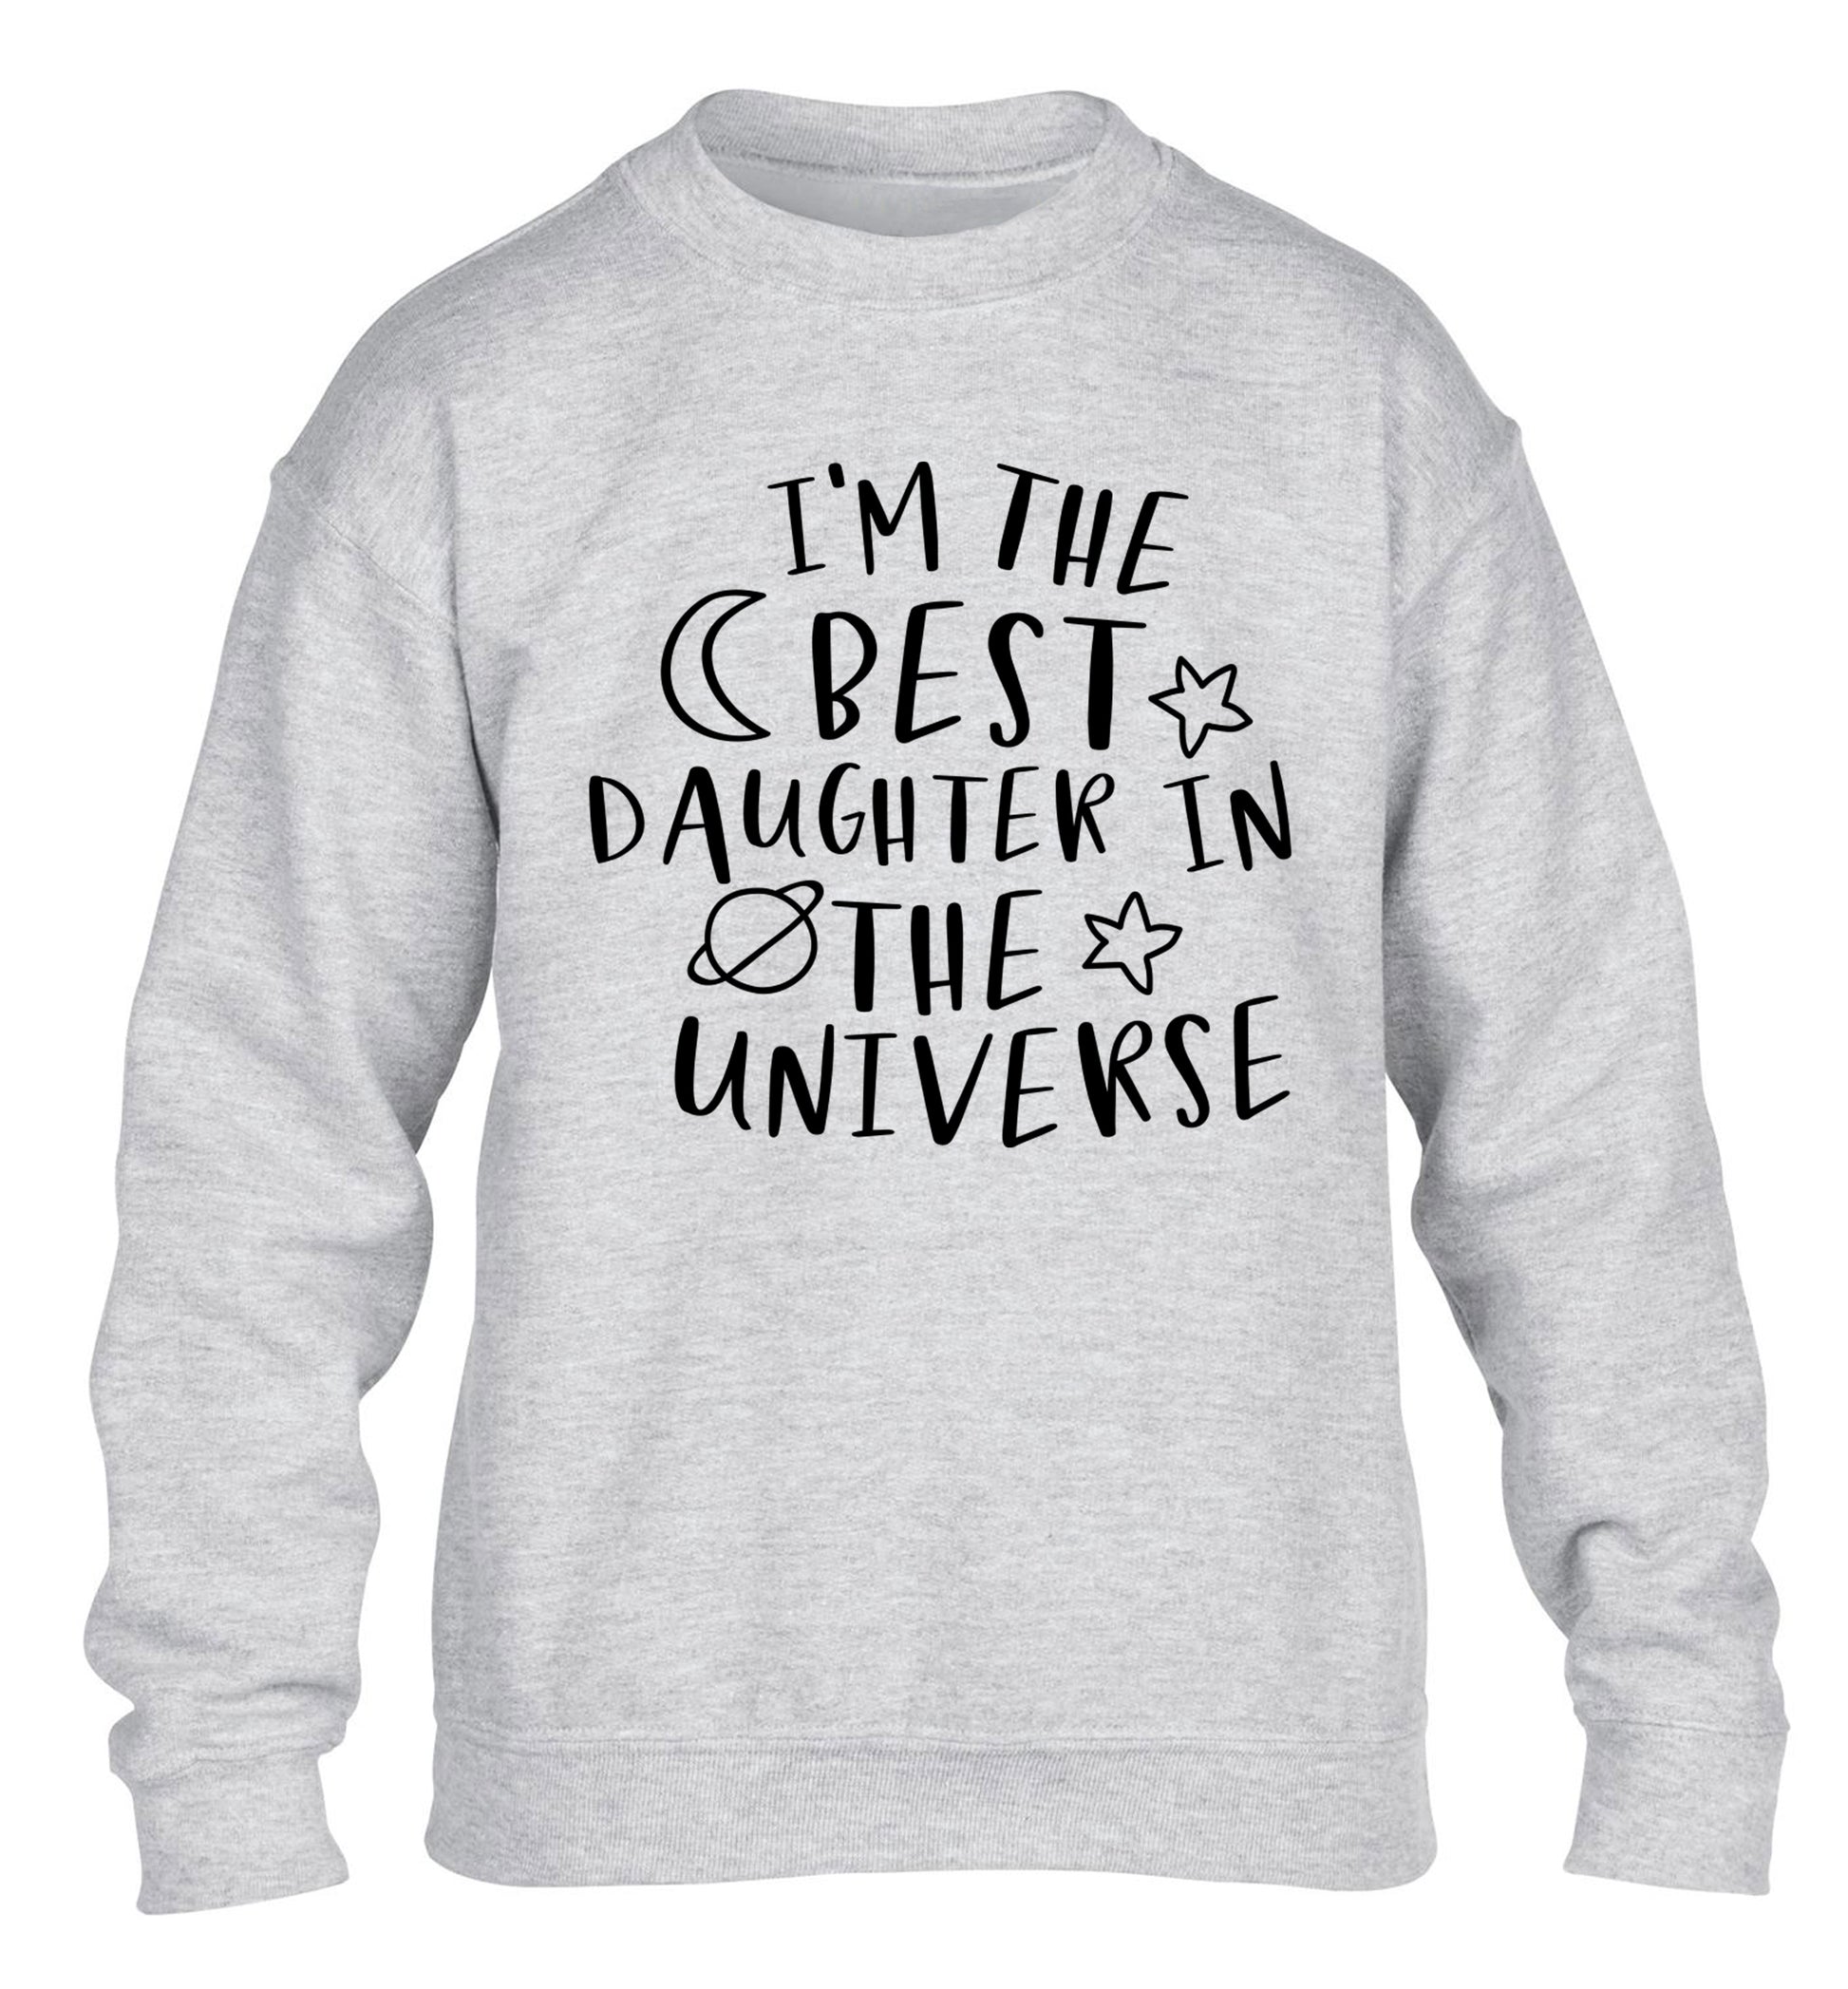 I'm the best daughter in the universe children's grey sweater 12-13 Years